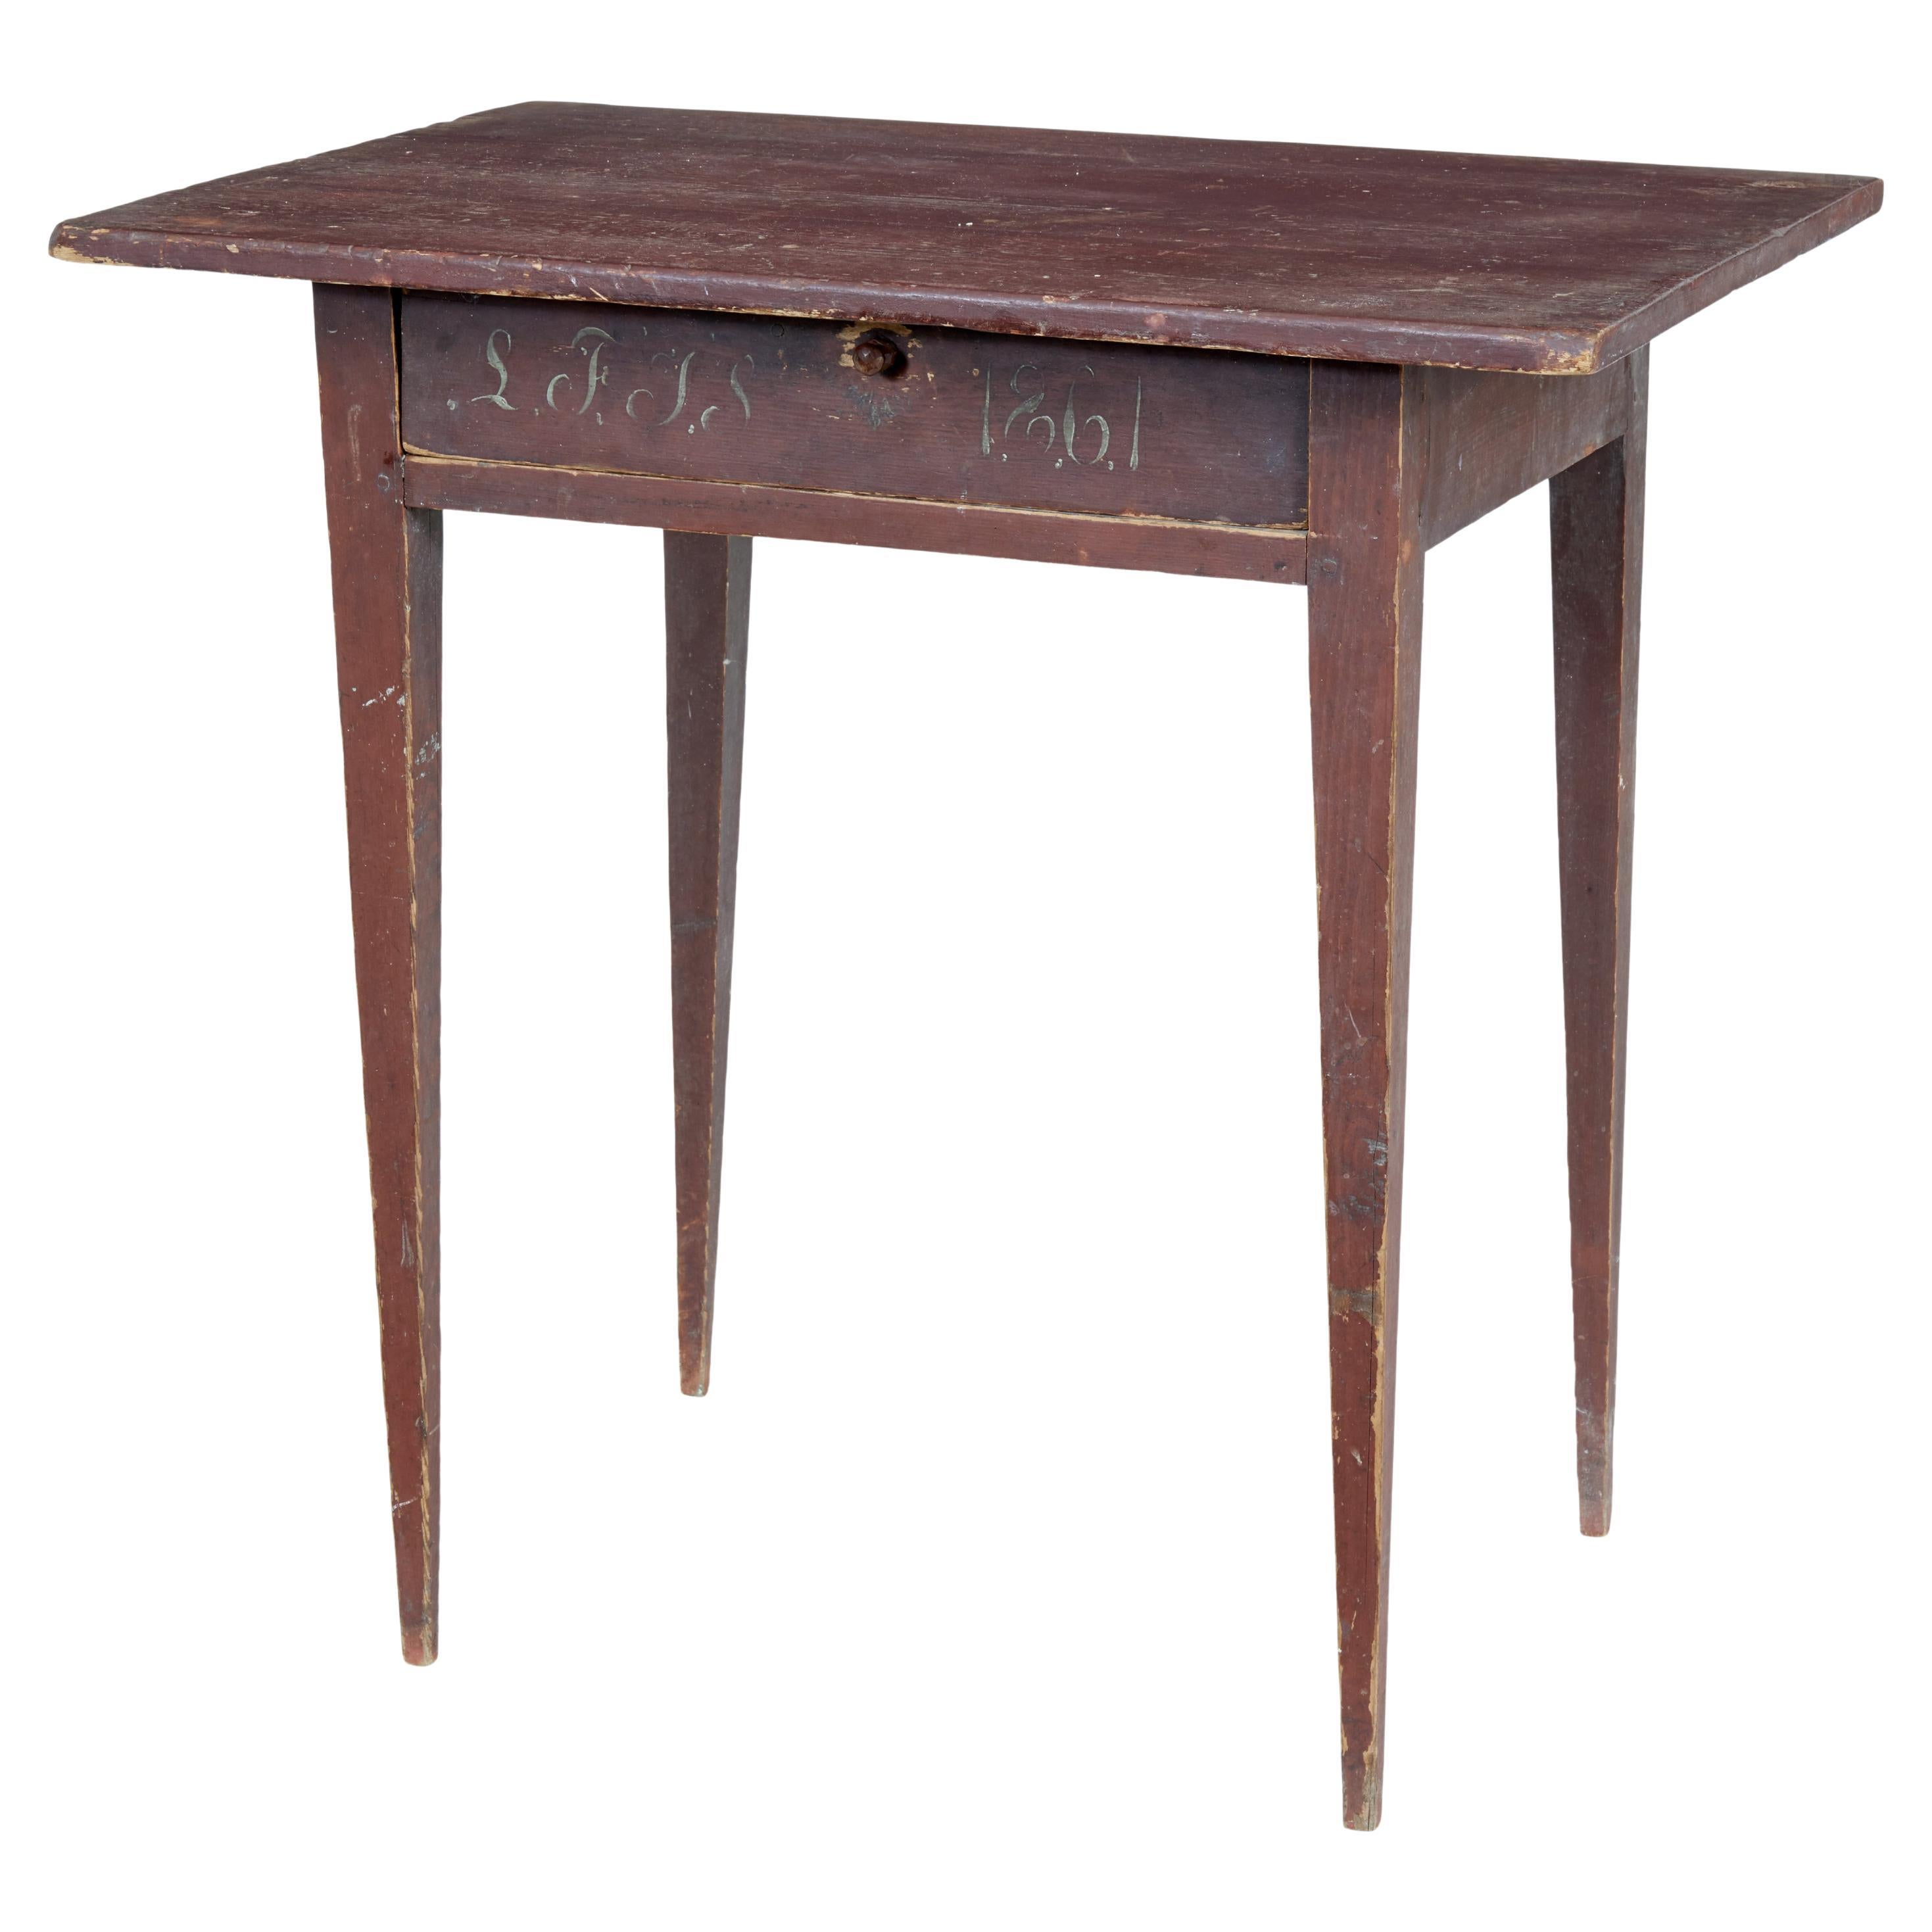 Swedish Mid 19th Century Rustic Painted Pine Side Table